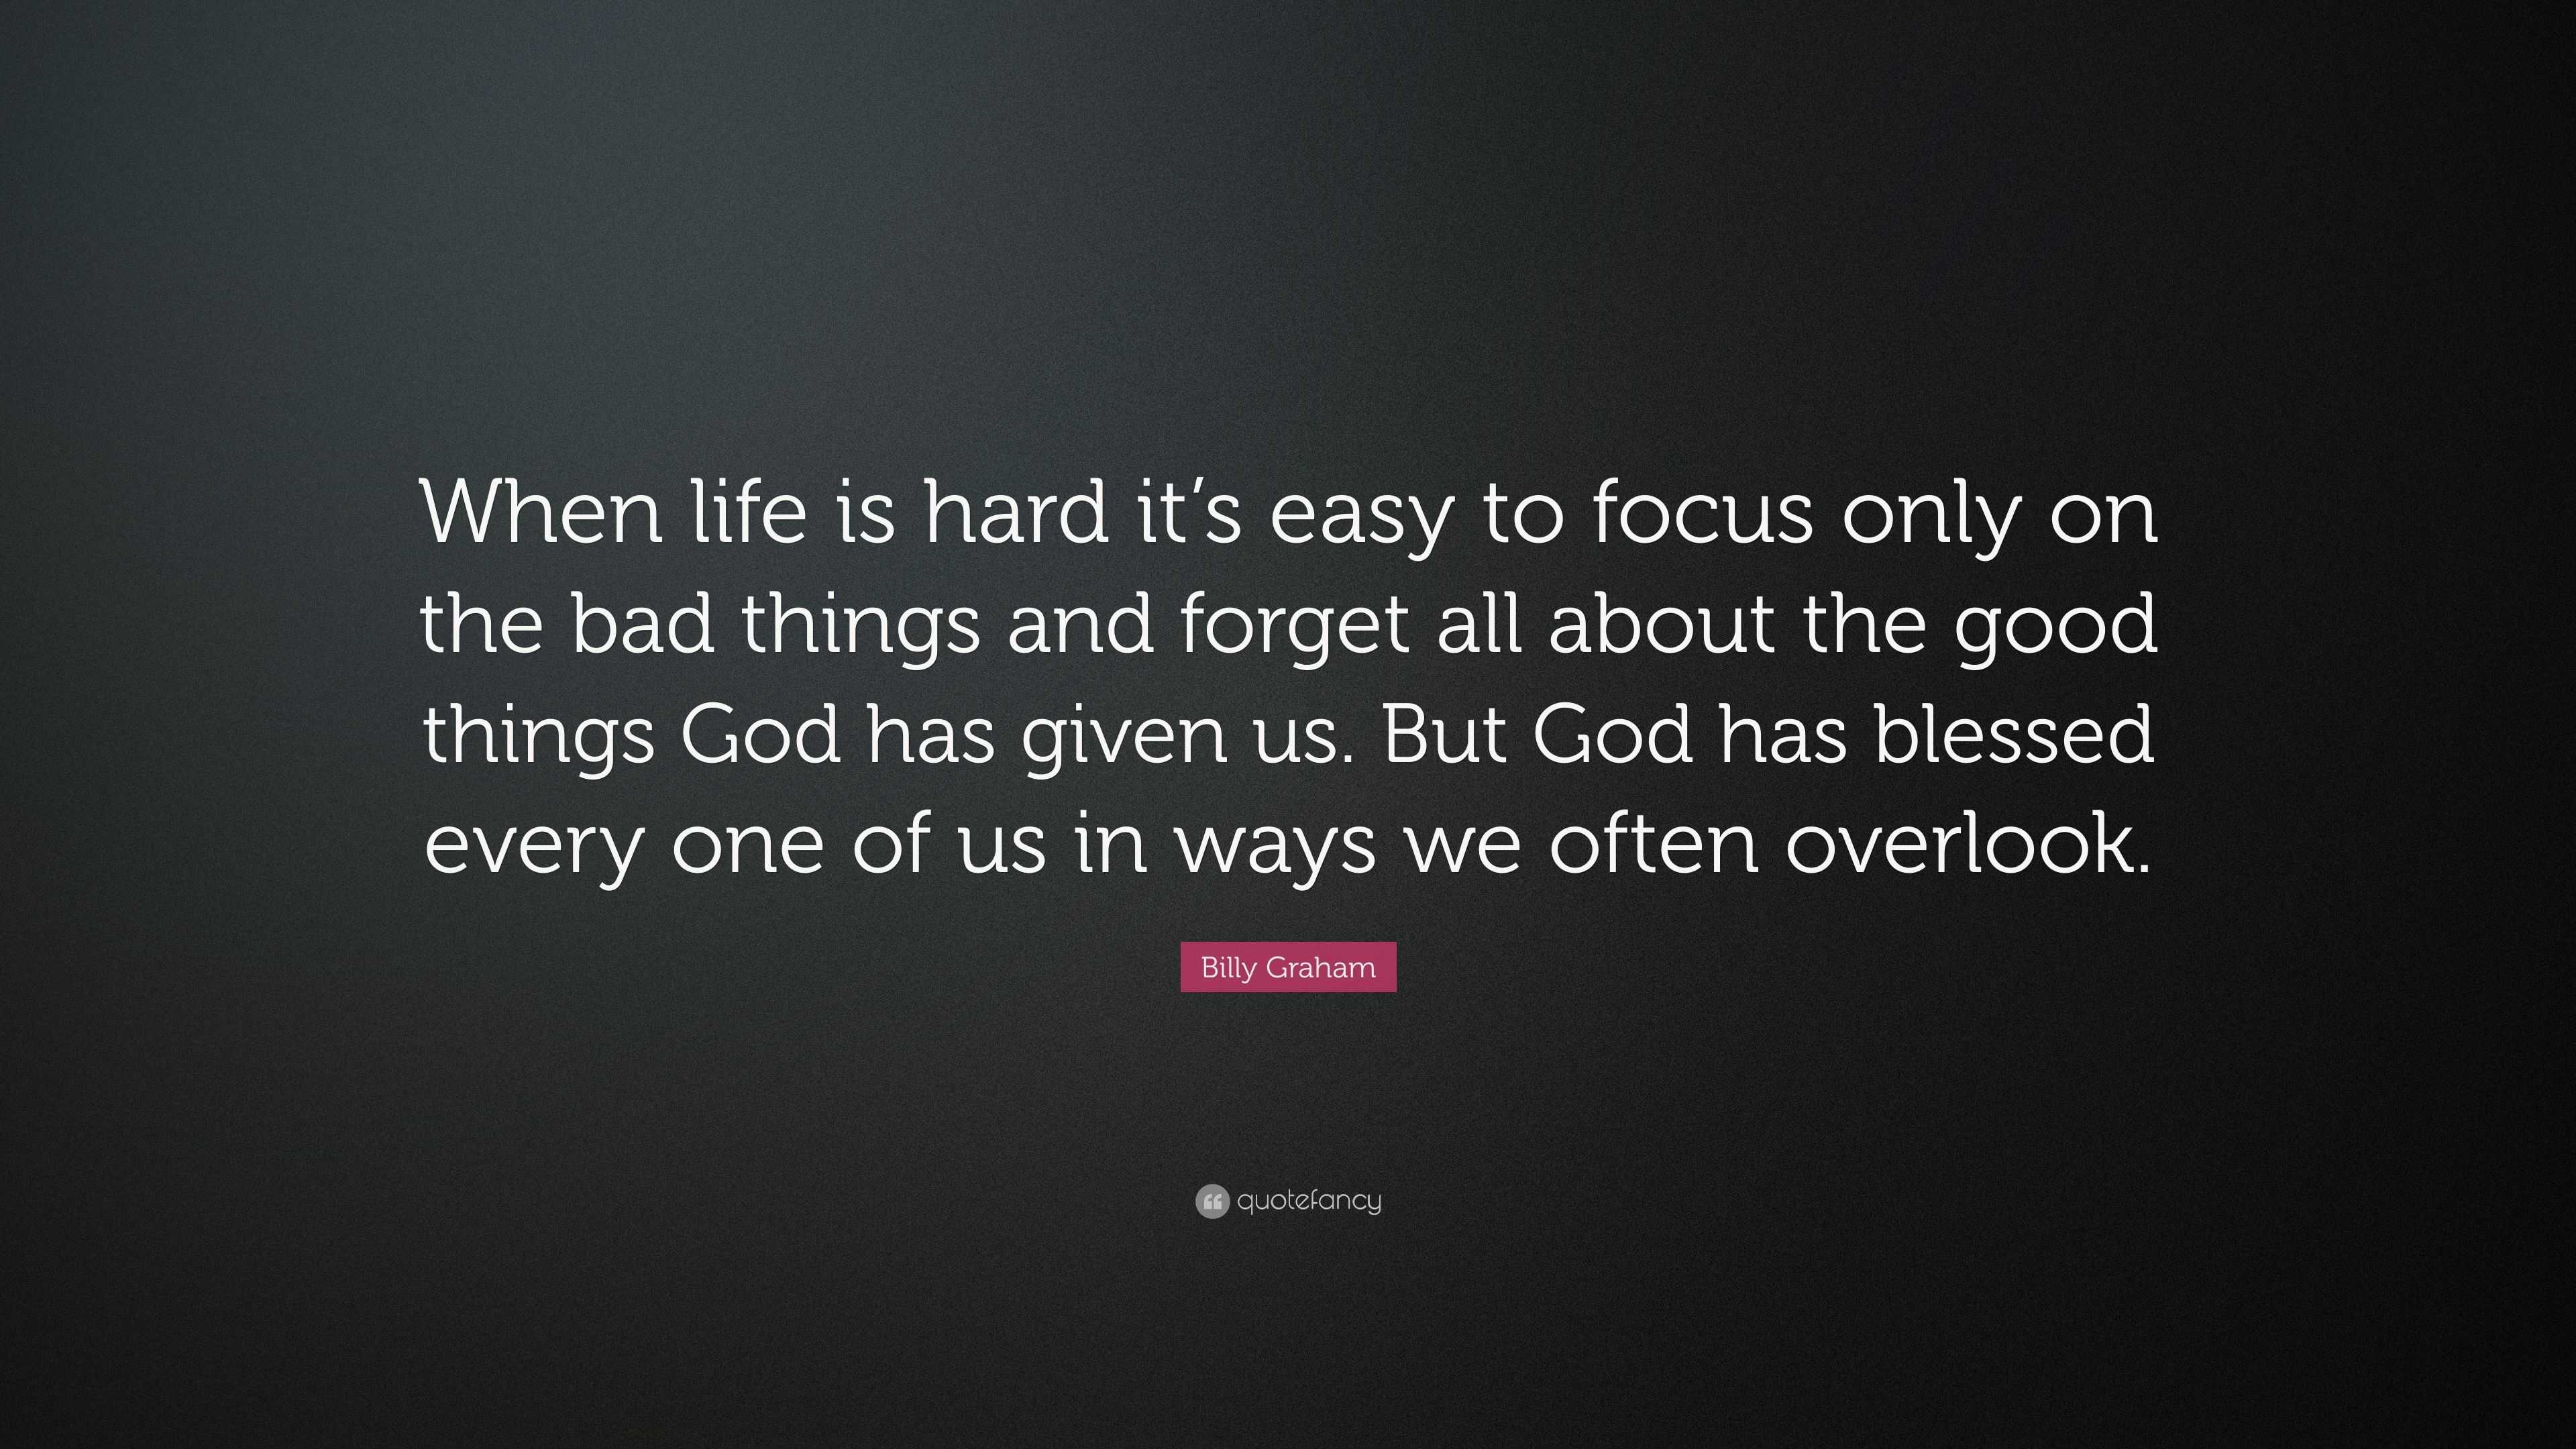 Billy Graham Quote “When life is hard it s easy to focus only on the